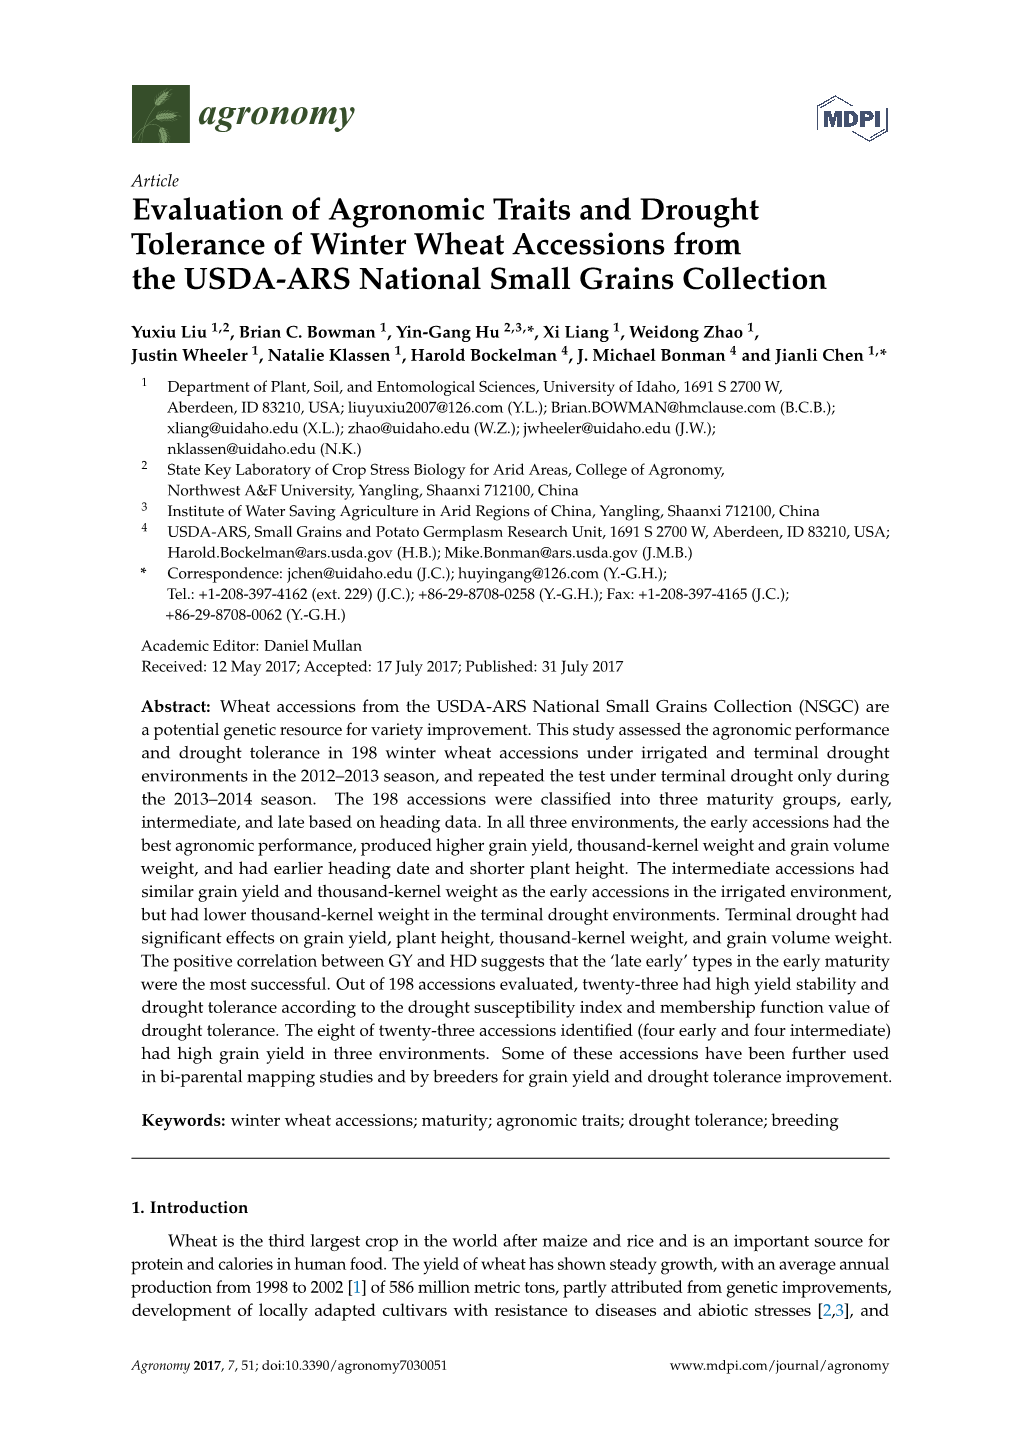 Evaluation of Agronomic Traits and Drought Tolerance of Winter Wheat Accessions from the USDA-ARS National Small Grains Collection